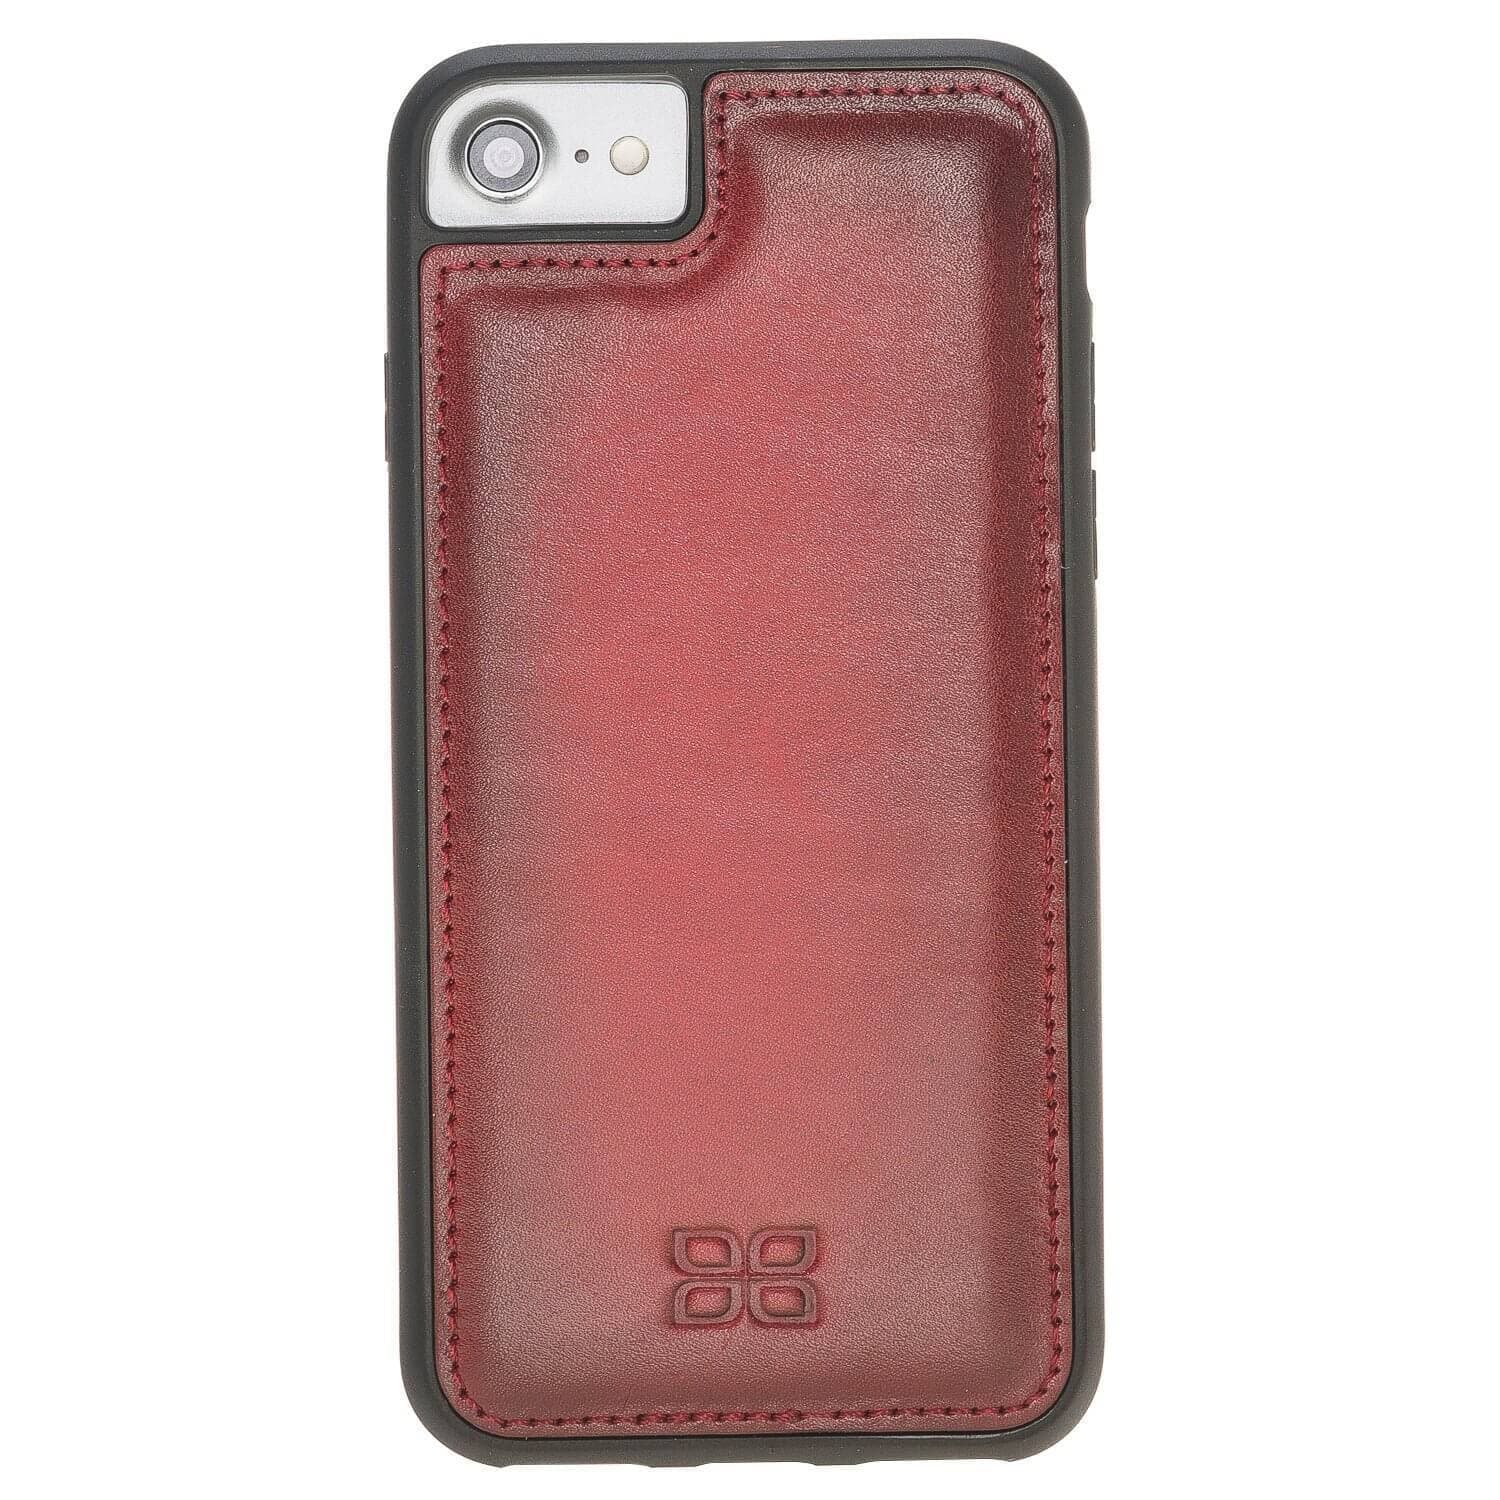 Flexible Genuine Leather Back Cover for Apple iPhone 8 Series iPhone 8 / Vegetal Red Bouletta LTD